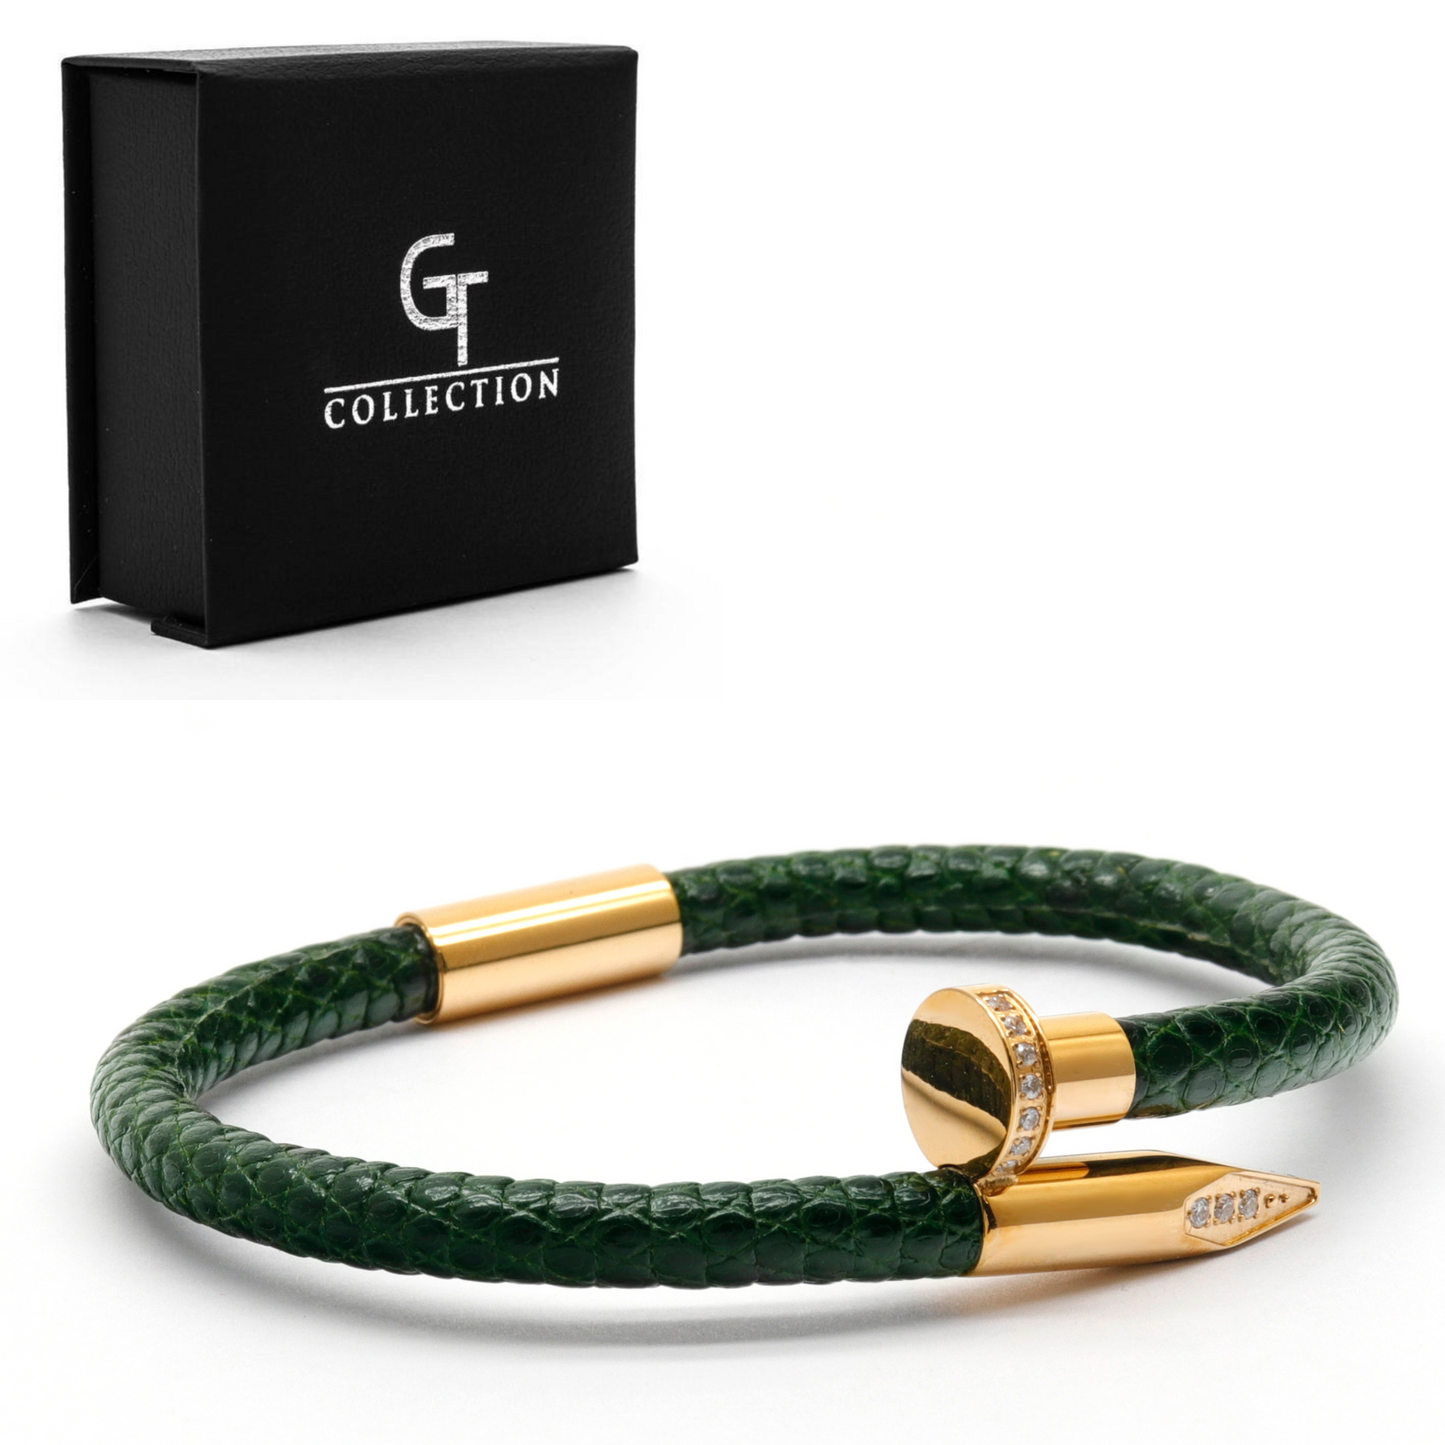 Bracelet - Green Leather with Golden Nail and Zircon Diamond